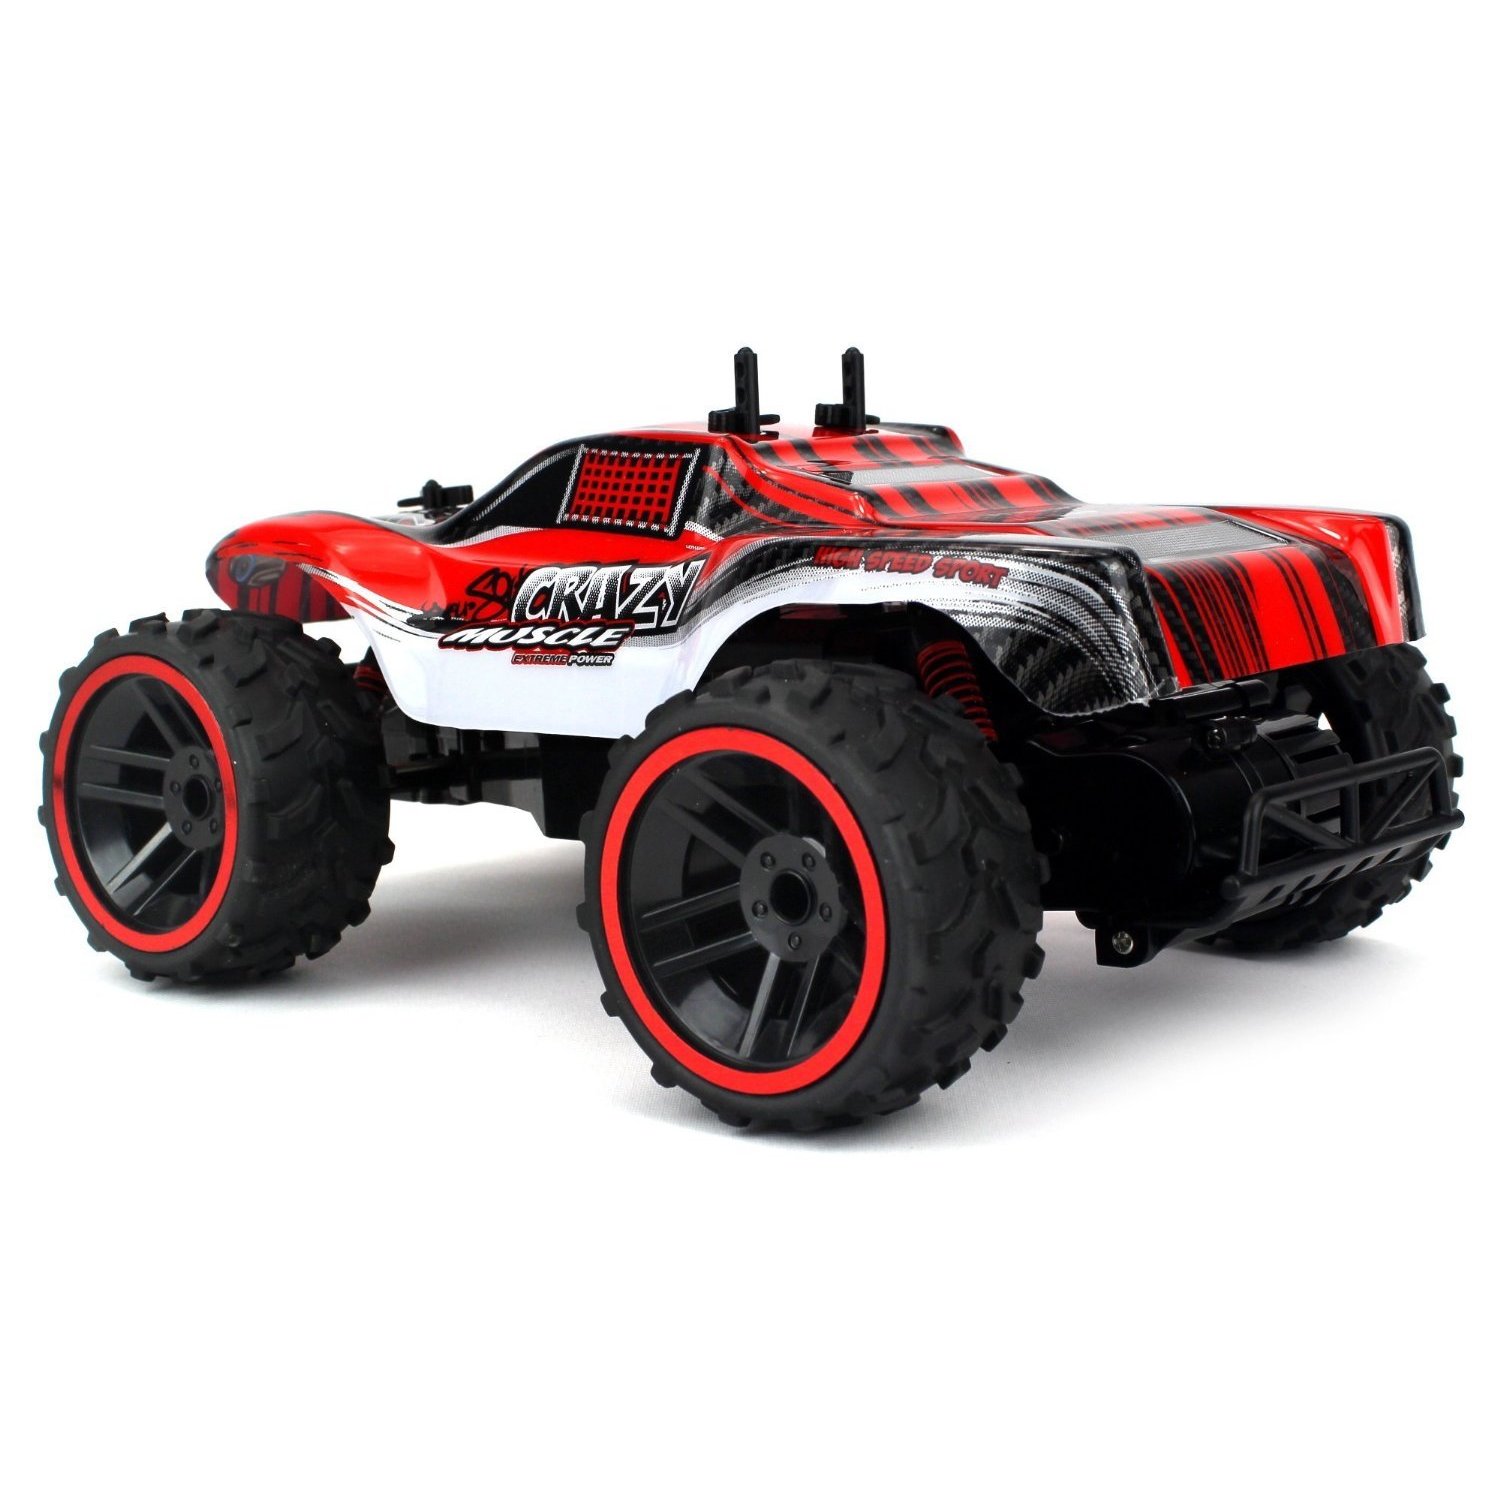 muscle extreme power rc car